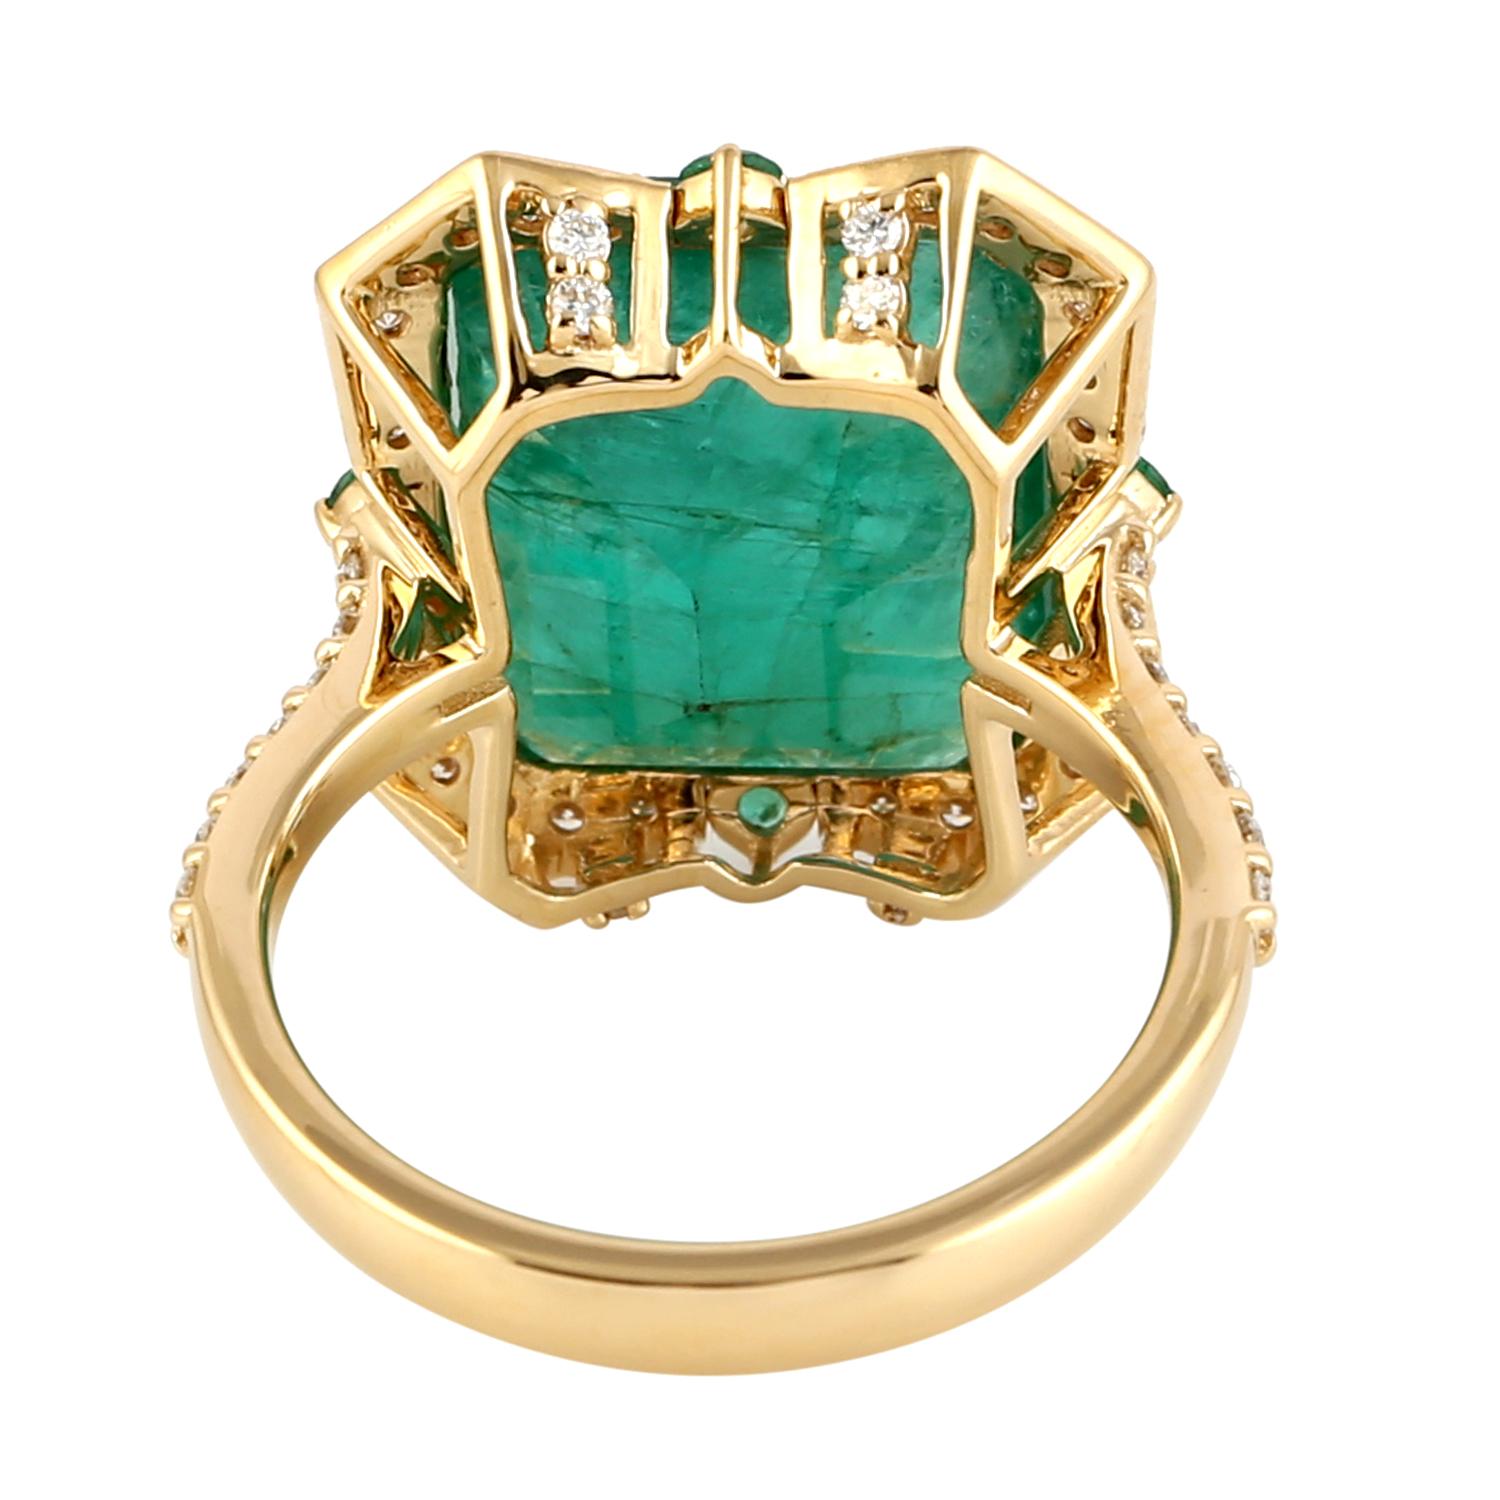 This ring has been meticulously crafted from 14-karat gold.  It is hand set with 10.16 carats emerald & .53 carats of sparkling diamonds. 

The ring is a size 7 and may be resized to larger or smaller upon request. 
FOLLOW  MEGHNA JEWELS storefront